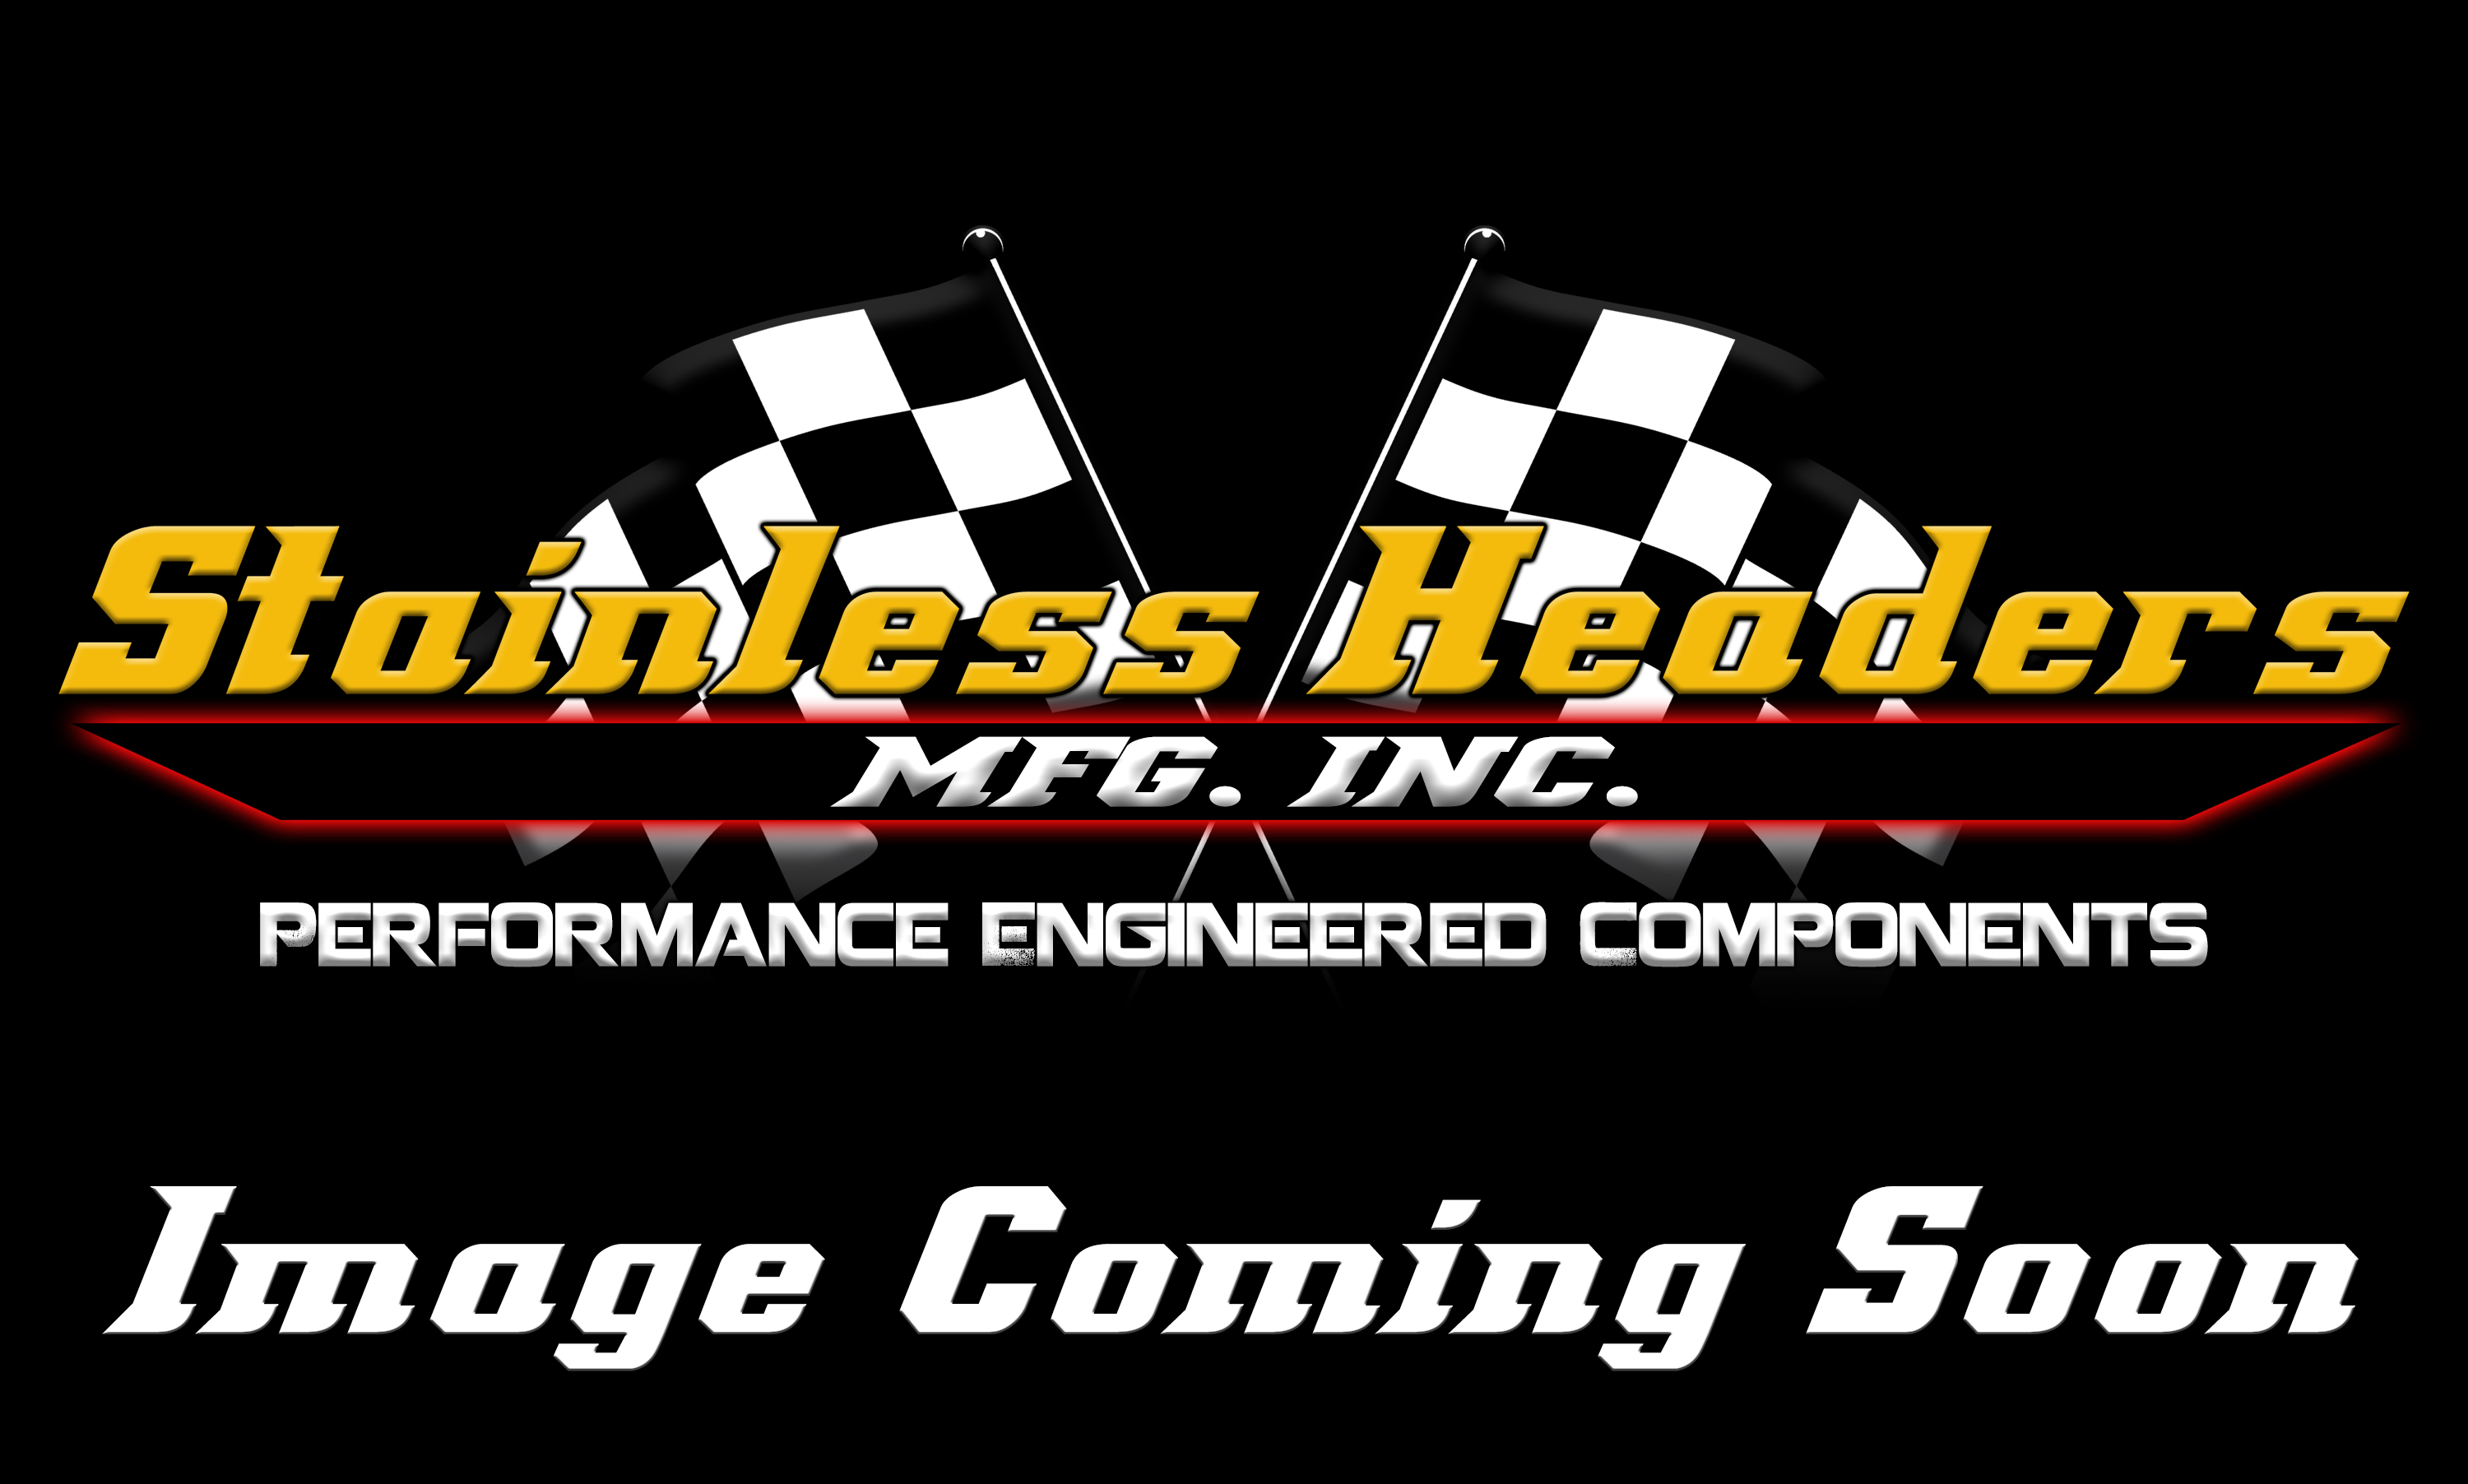 Stainless Headers - 2" Primary 4 into 1 Performance Merge Collector-16ga 321ss